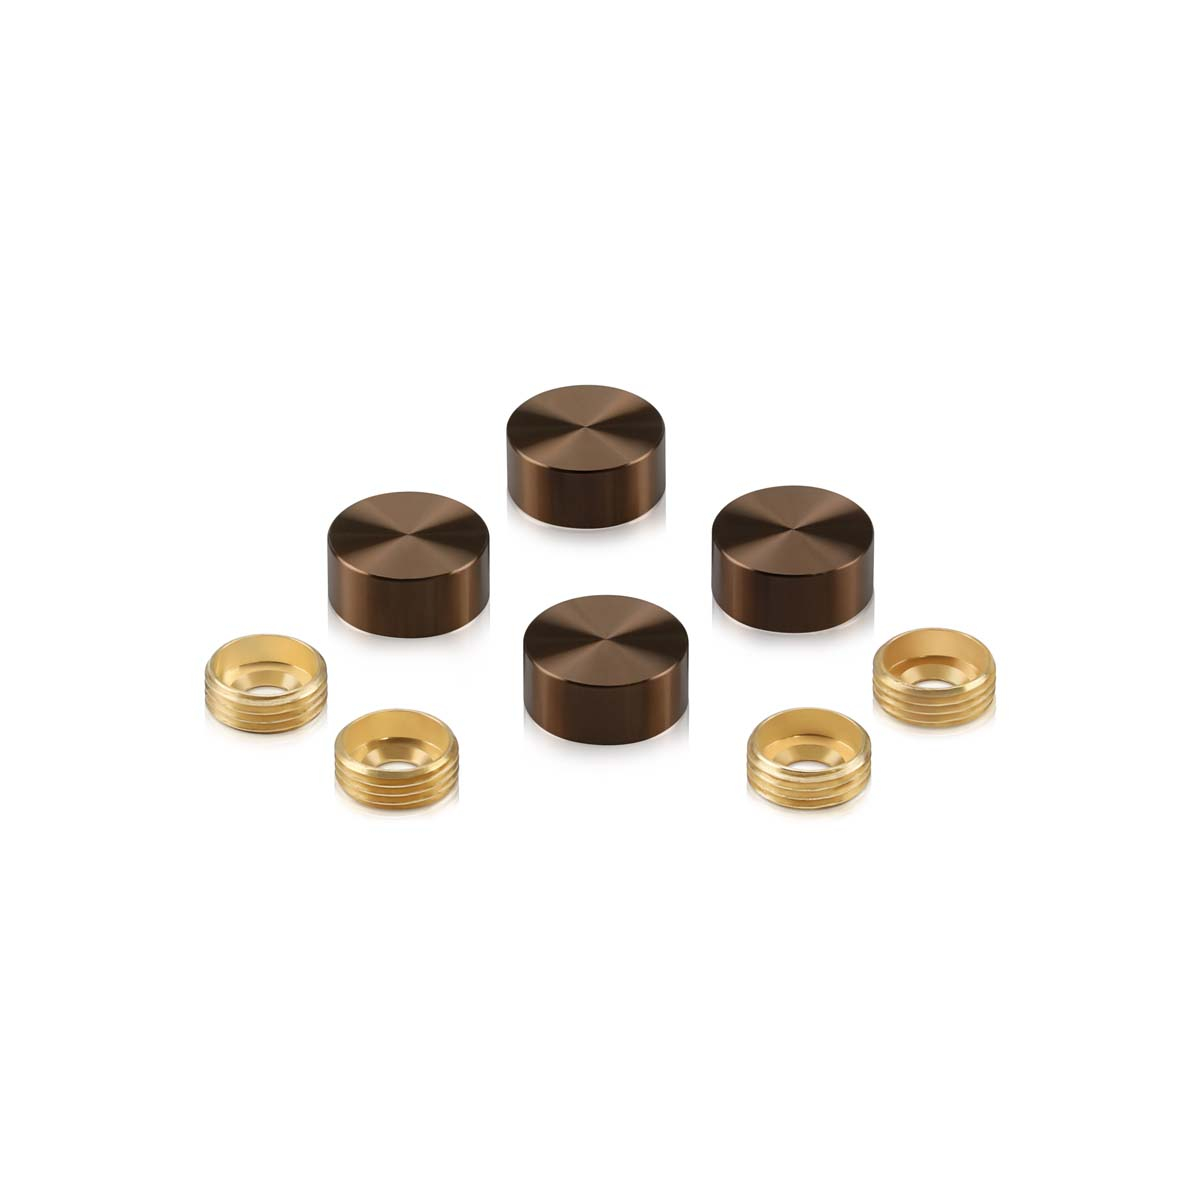 Set of 4 Screw Cover, Diameter: 5/8'', Aluminum Bronze Anodized Finish (Indoor or Outdoor Use), Special for 3/16'' Diameter TAPCON Screw Slotted Hex (TAPCON Screw Sold Separatly)